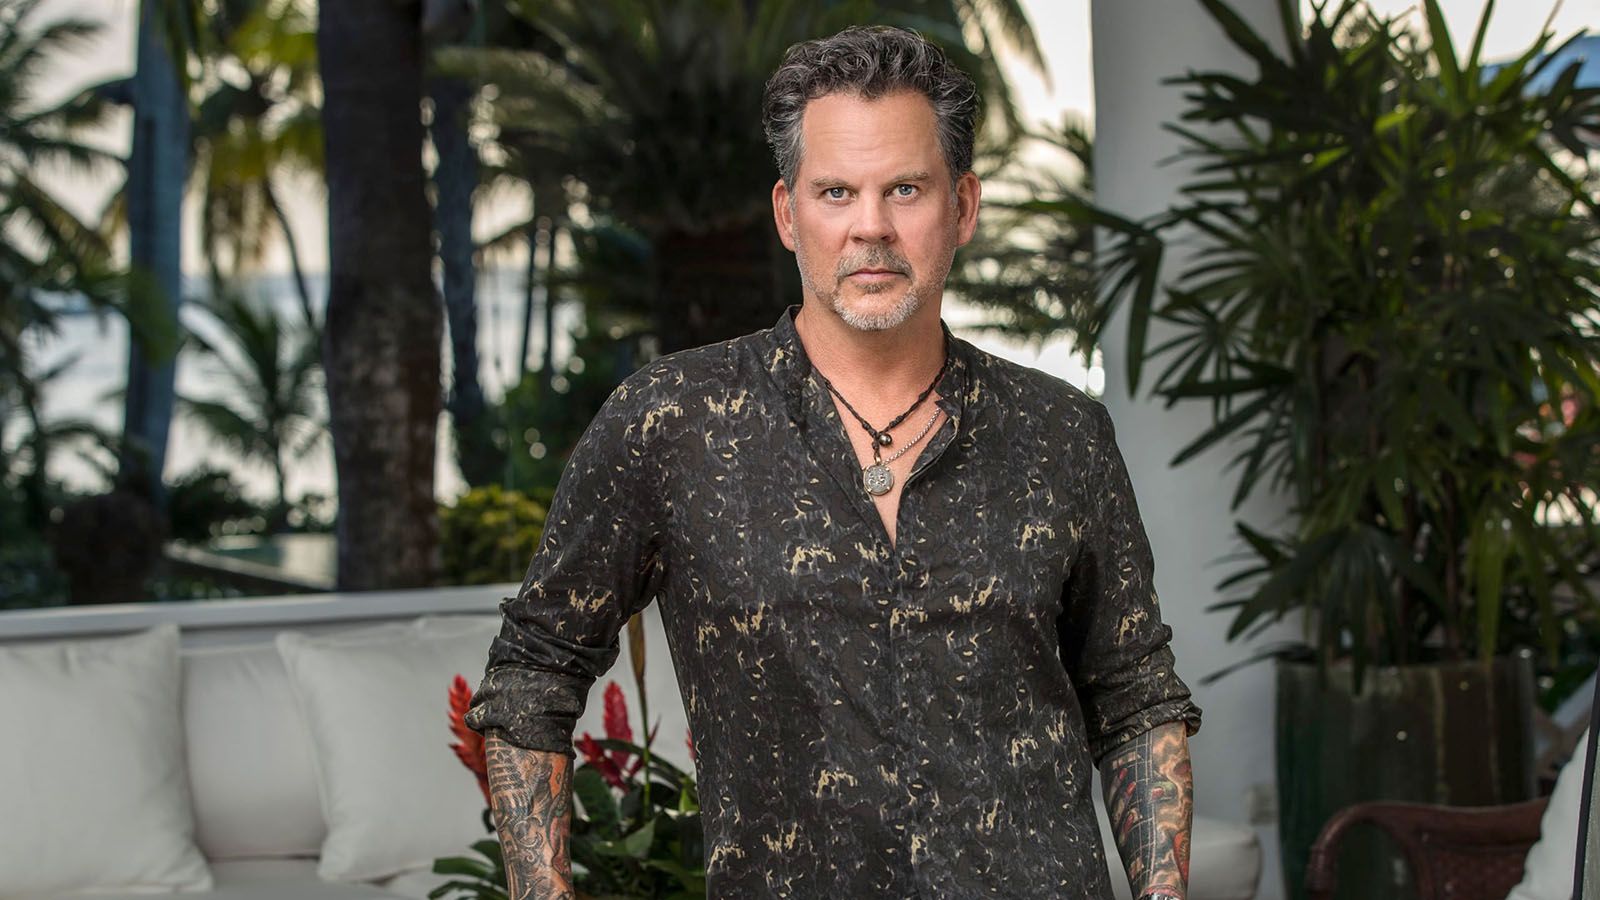 Gary Allan will be at Honeywell Center in Wabash on June 28.